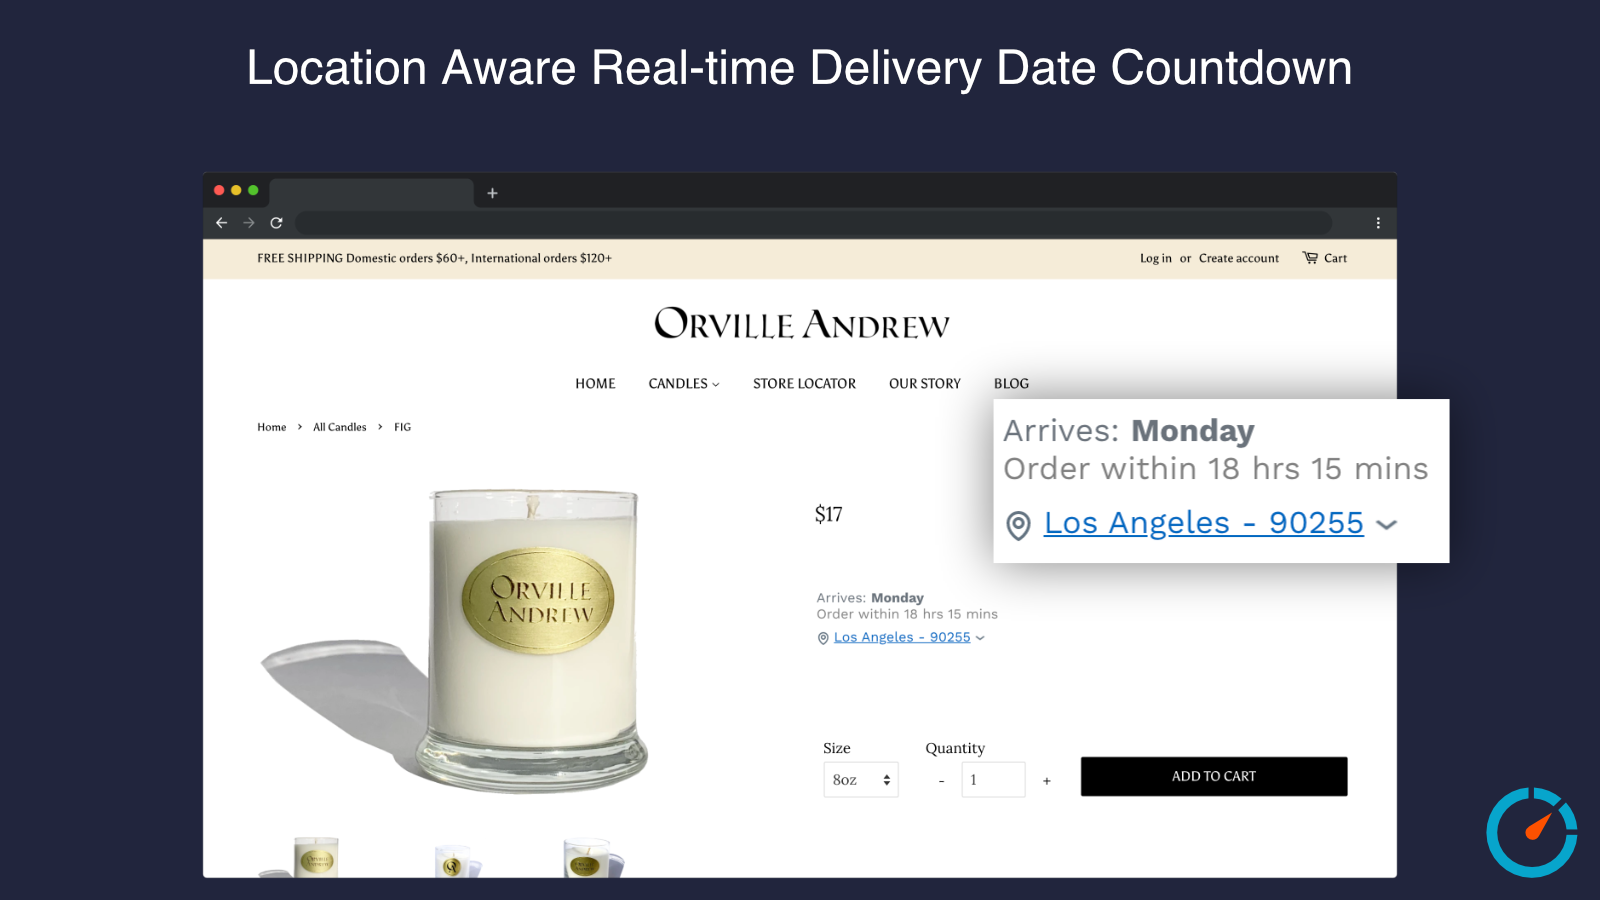 lLocation Aware Real-time Delivery Date Countdown